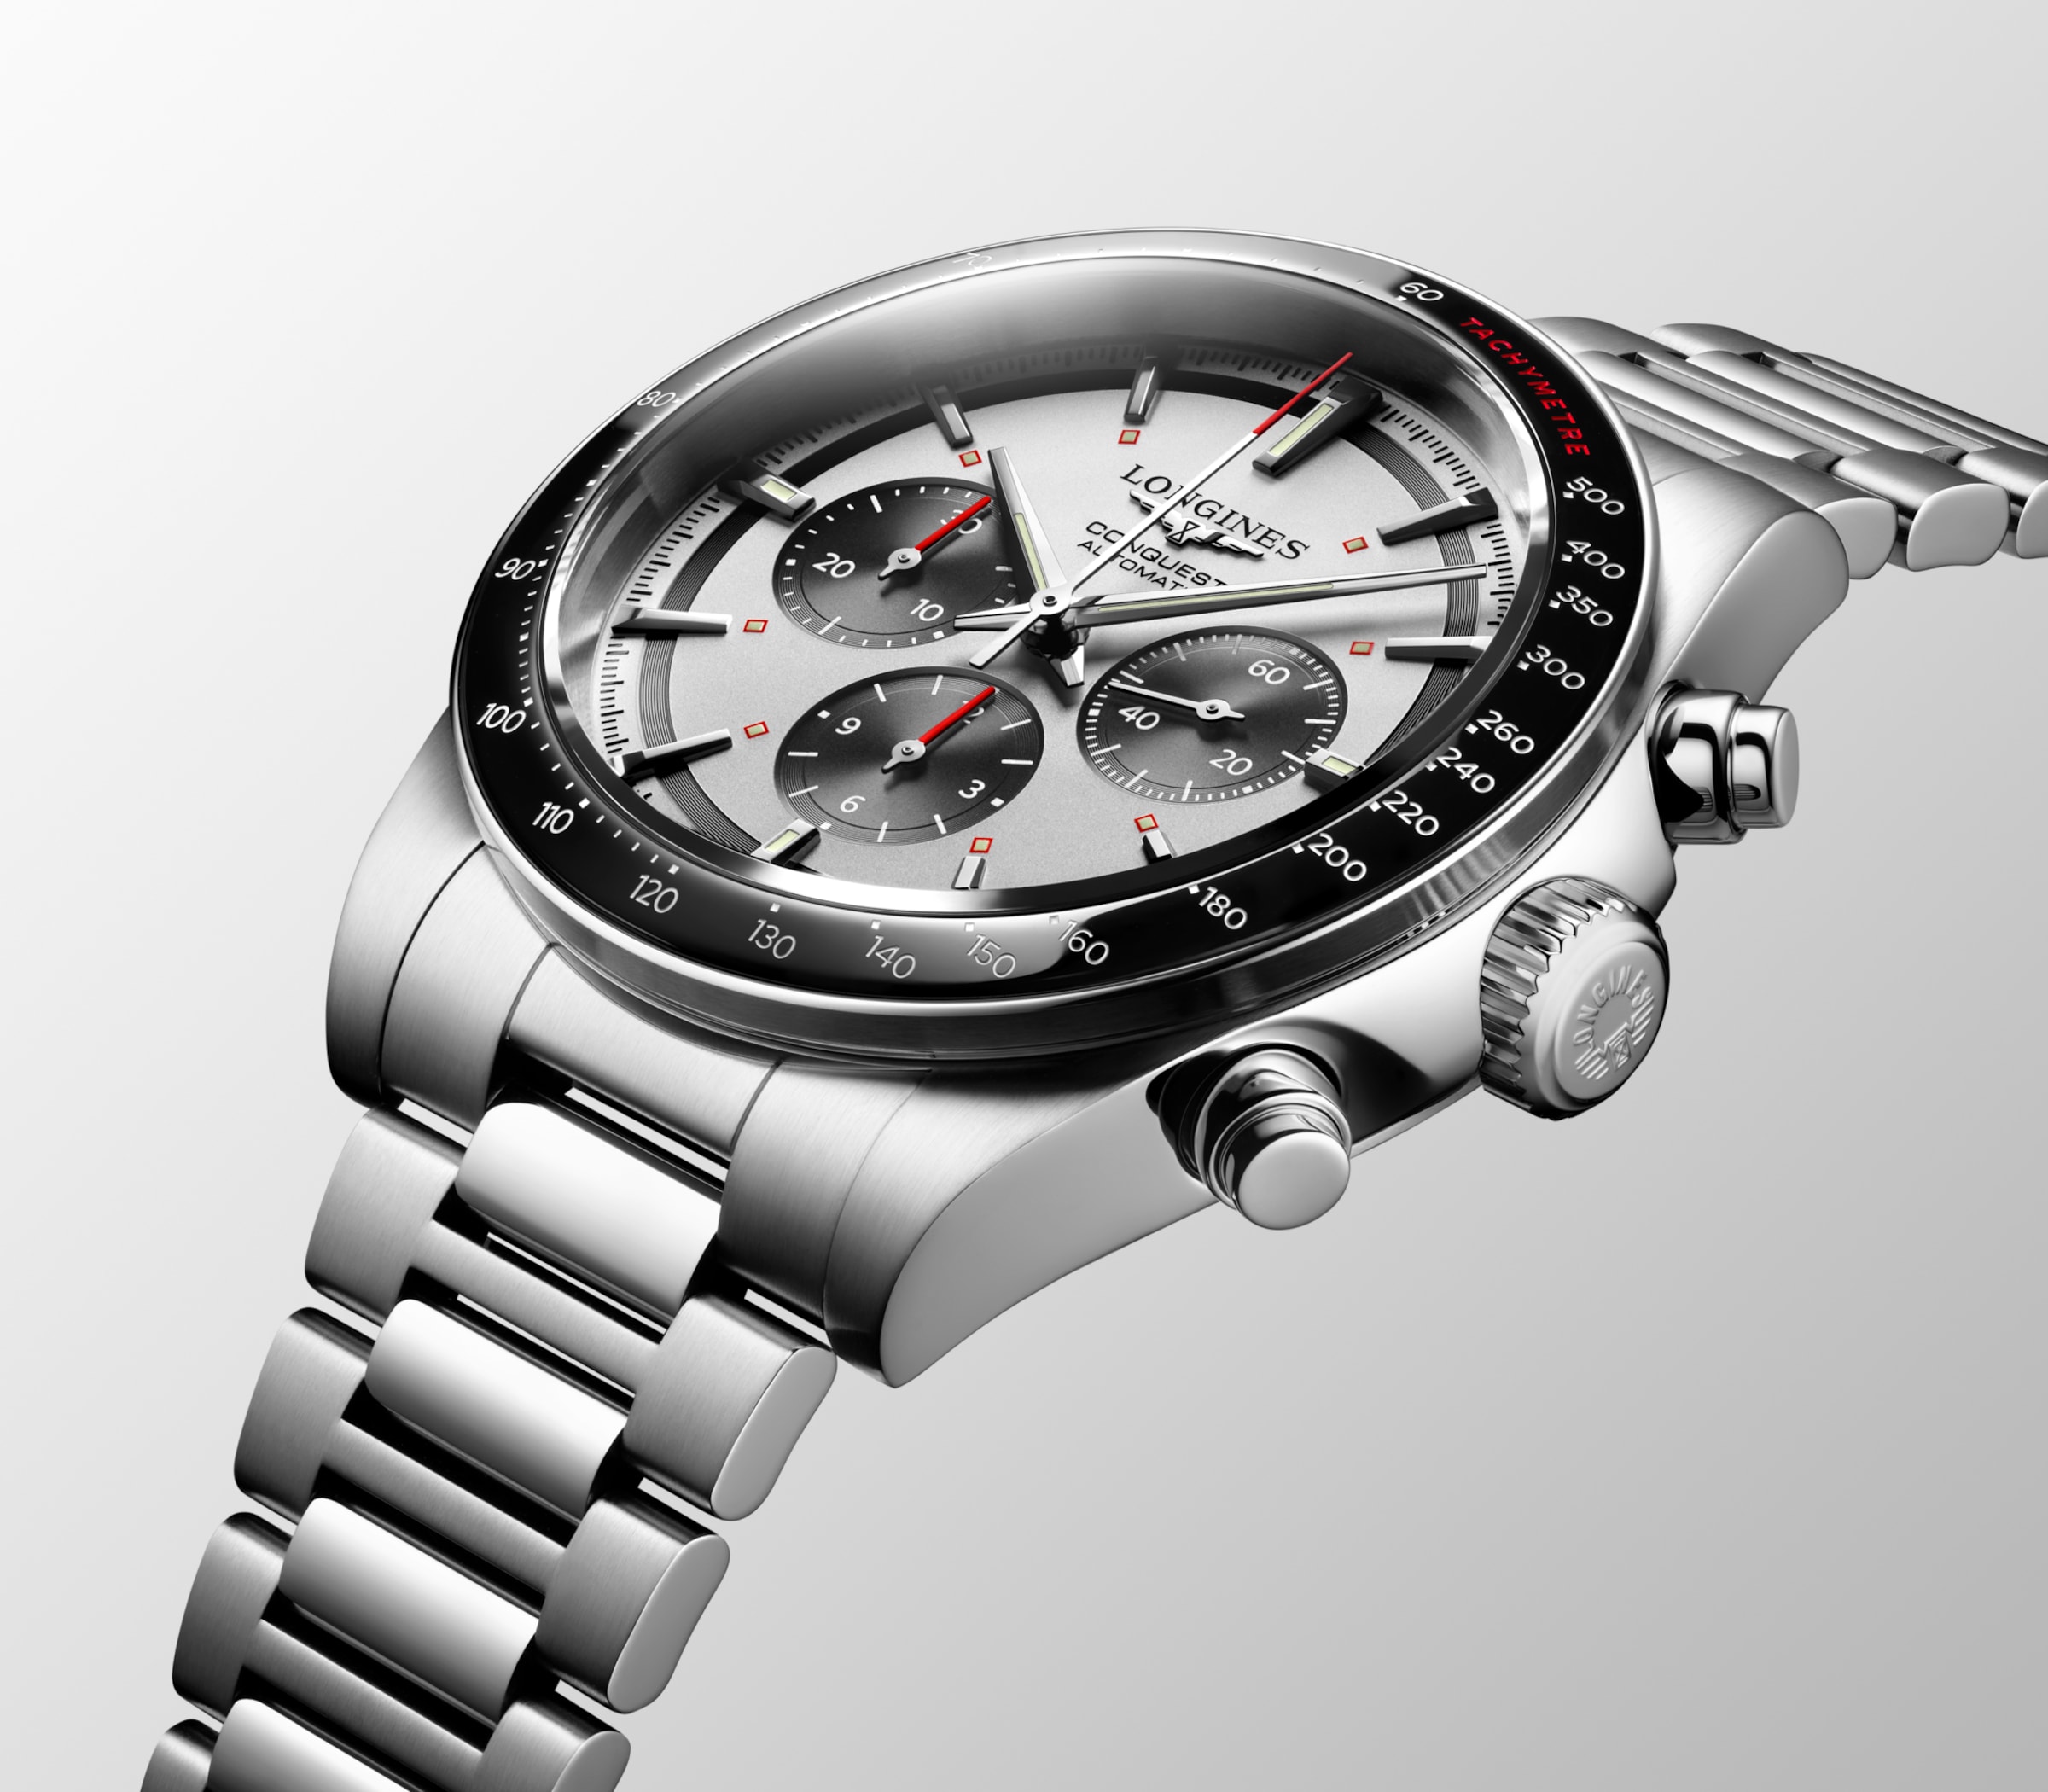 40 Years of Excellence with the Longines Elegance Collection